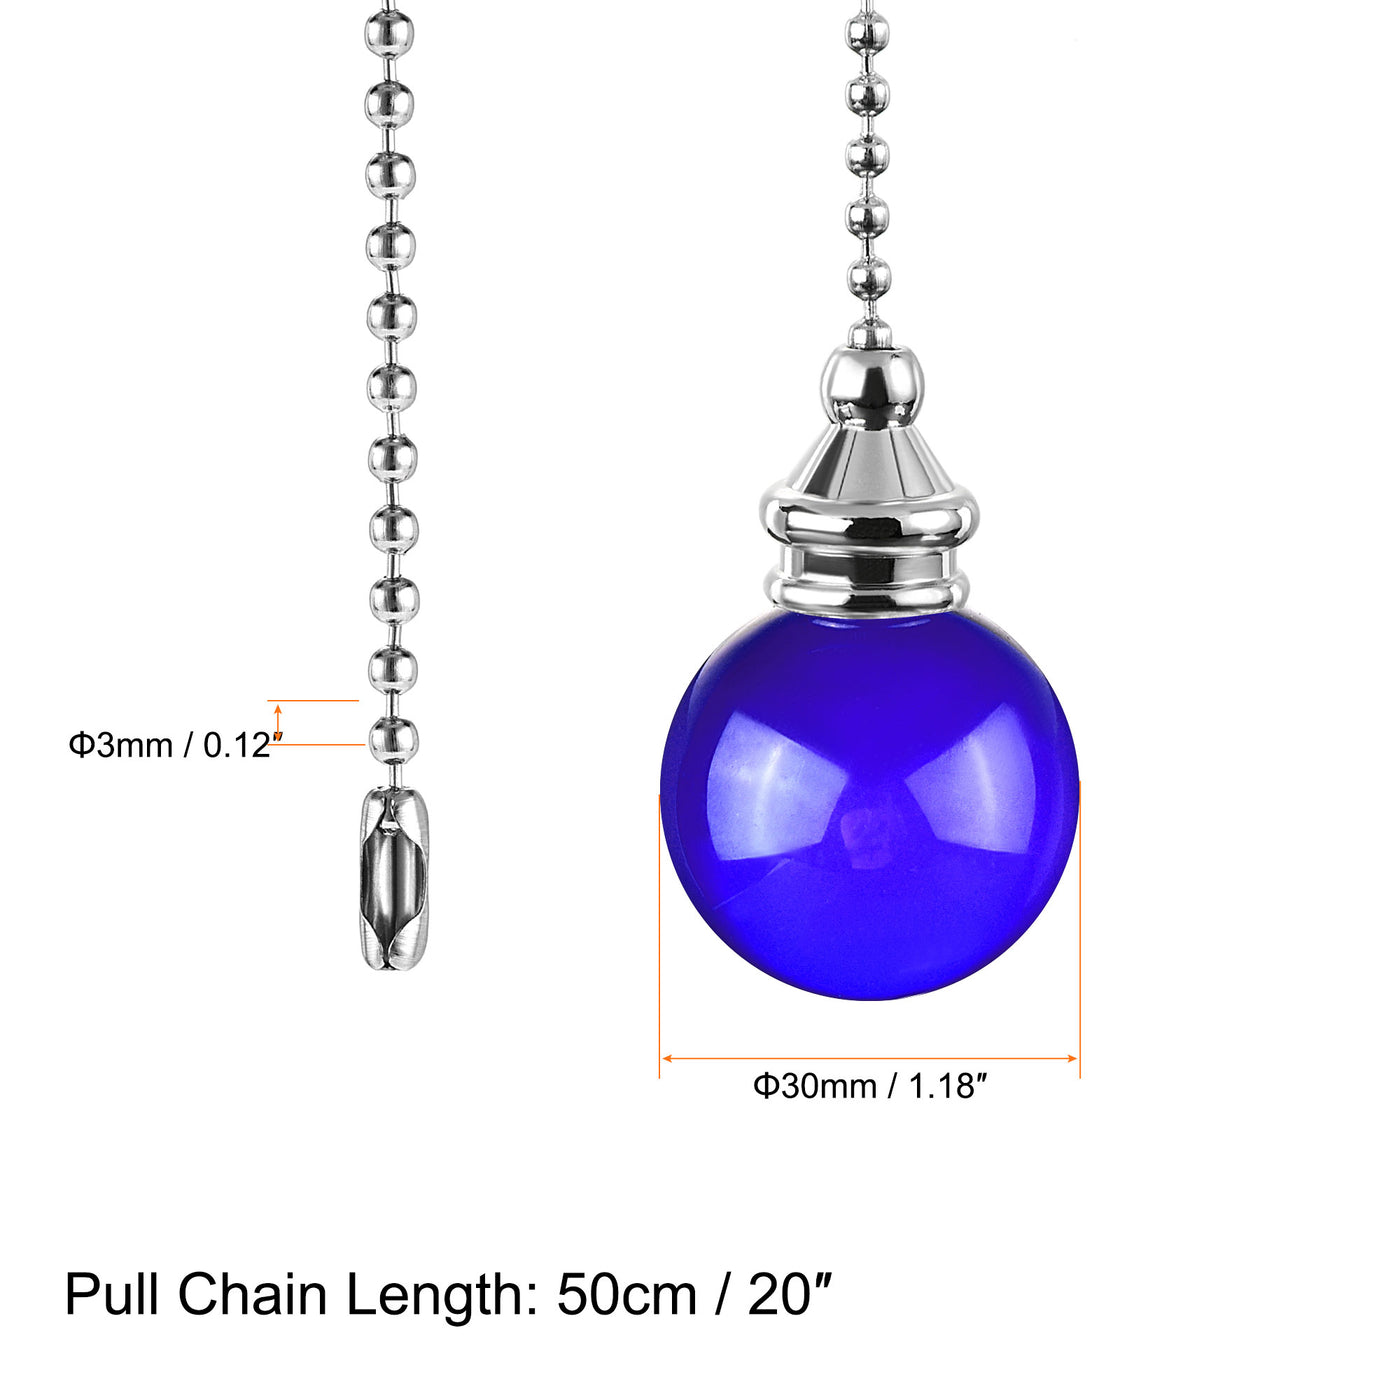 uxcell Uxcell Ceiling Fan Pull Chain, 20 Inch Fan Pull Chain Ornament Extension Lighting Accessories, 30mm Crystal Ball Pendant, Blue 2Pcs